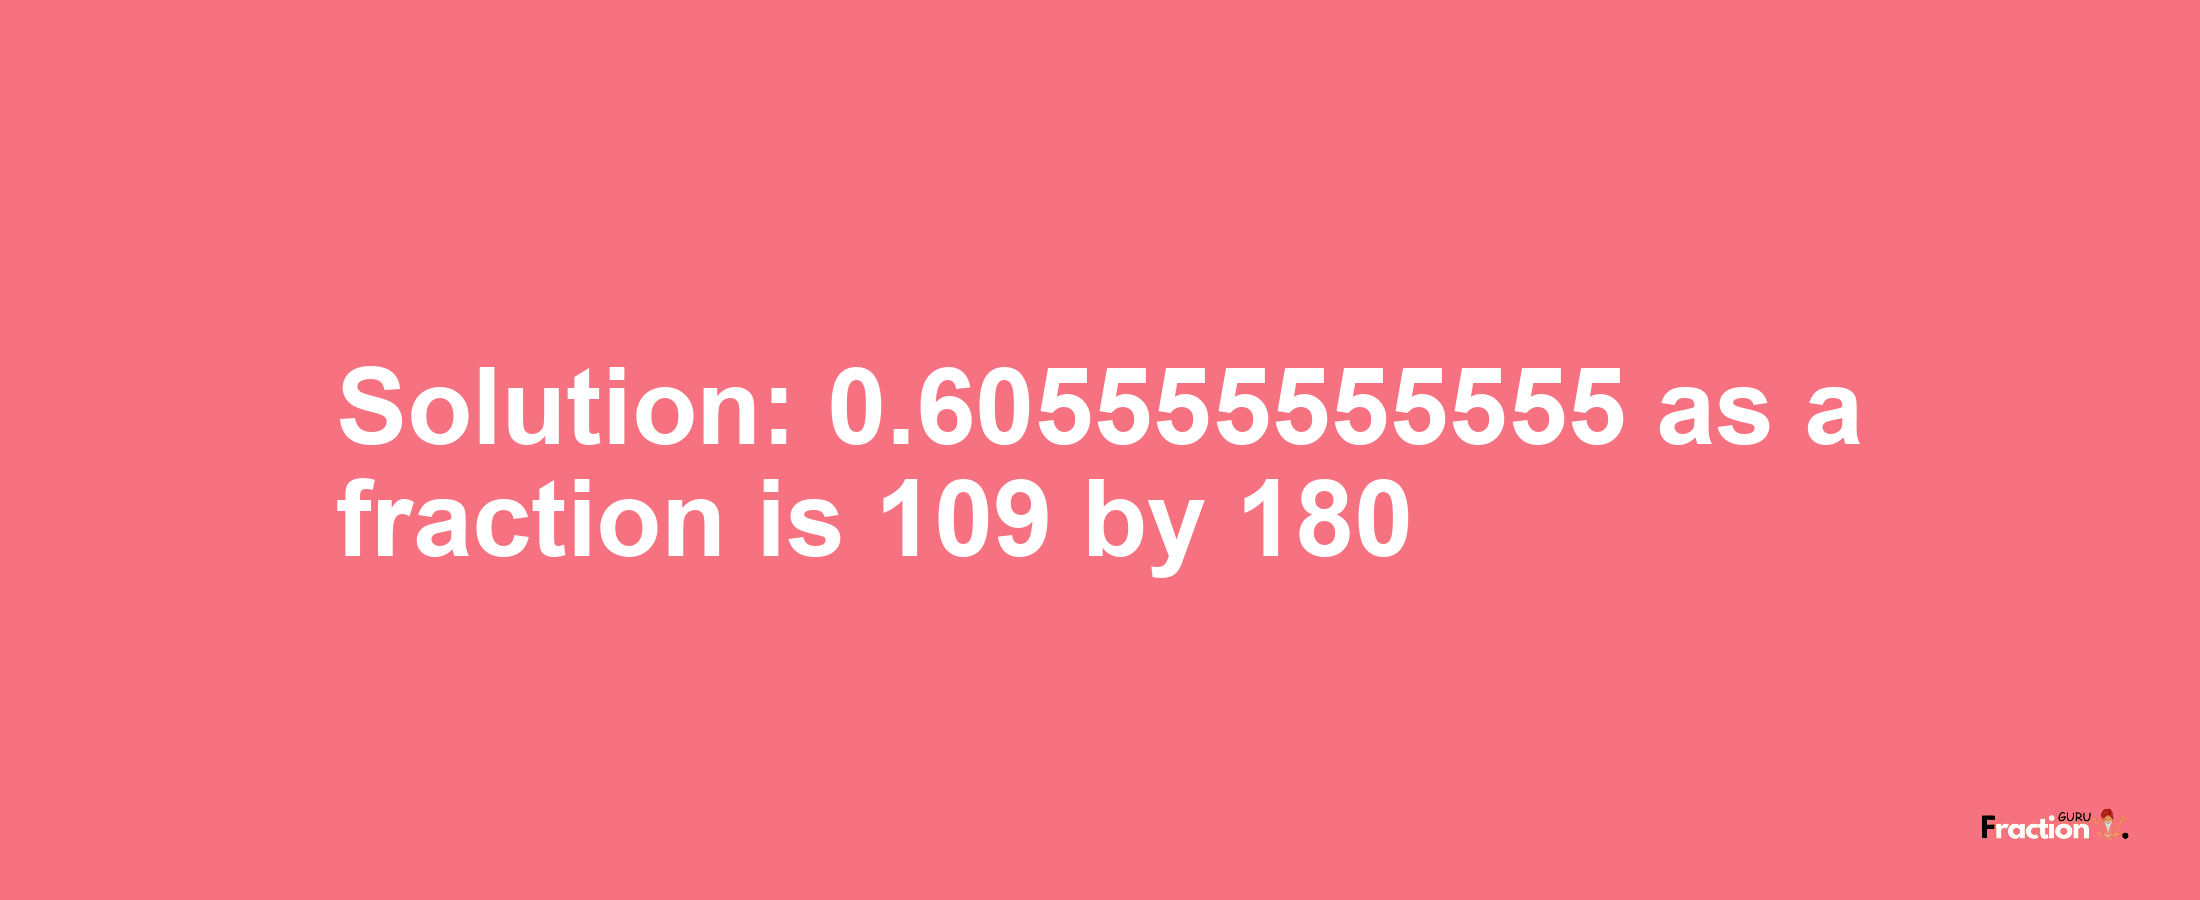 Solution:0.605555555555 as a fraction is 109/180